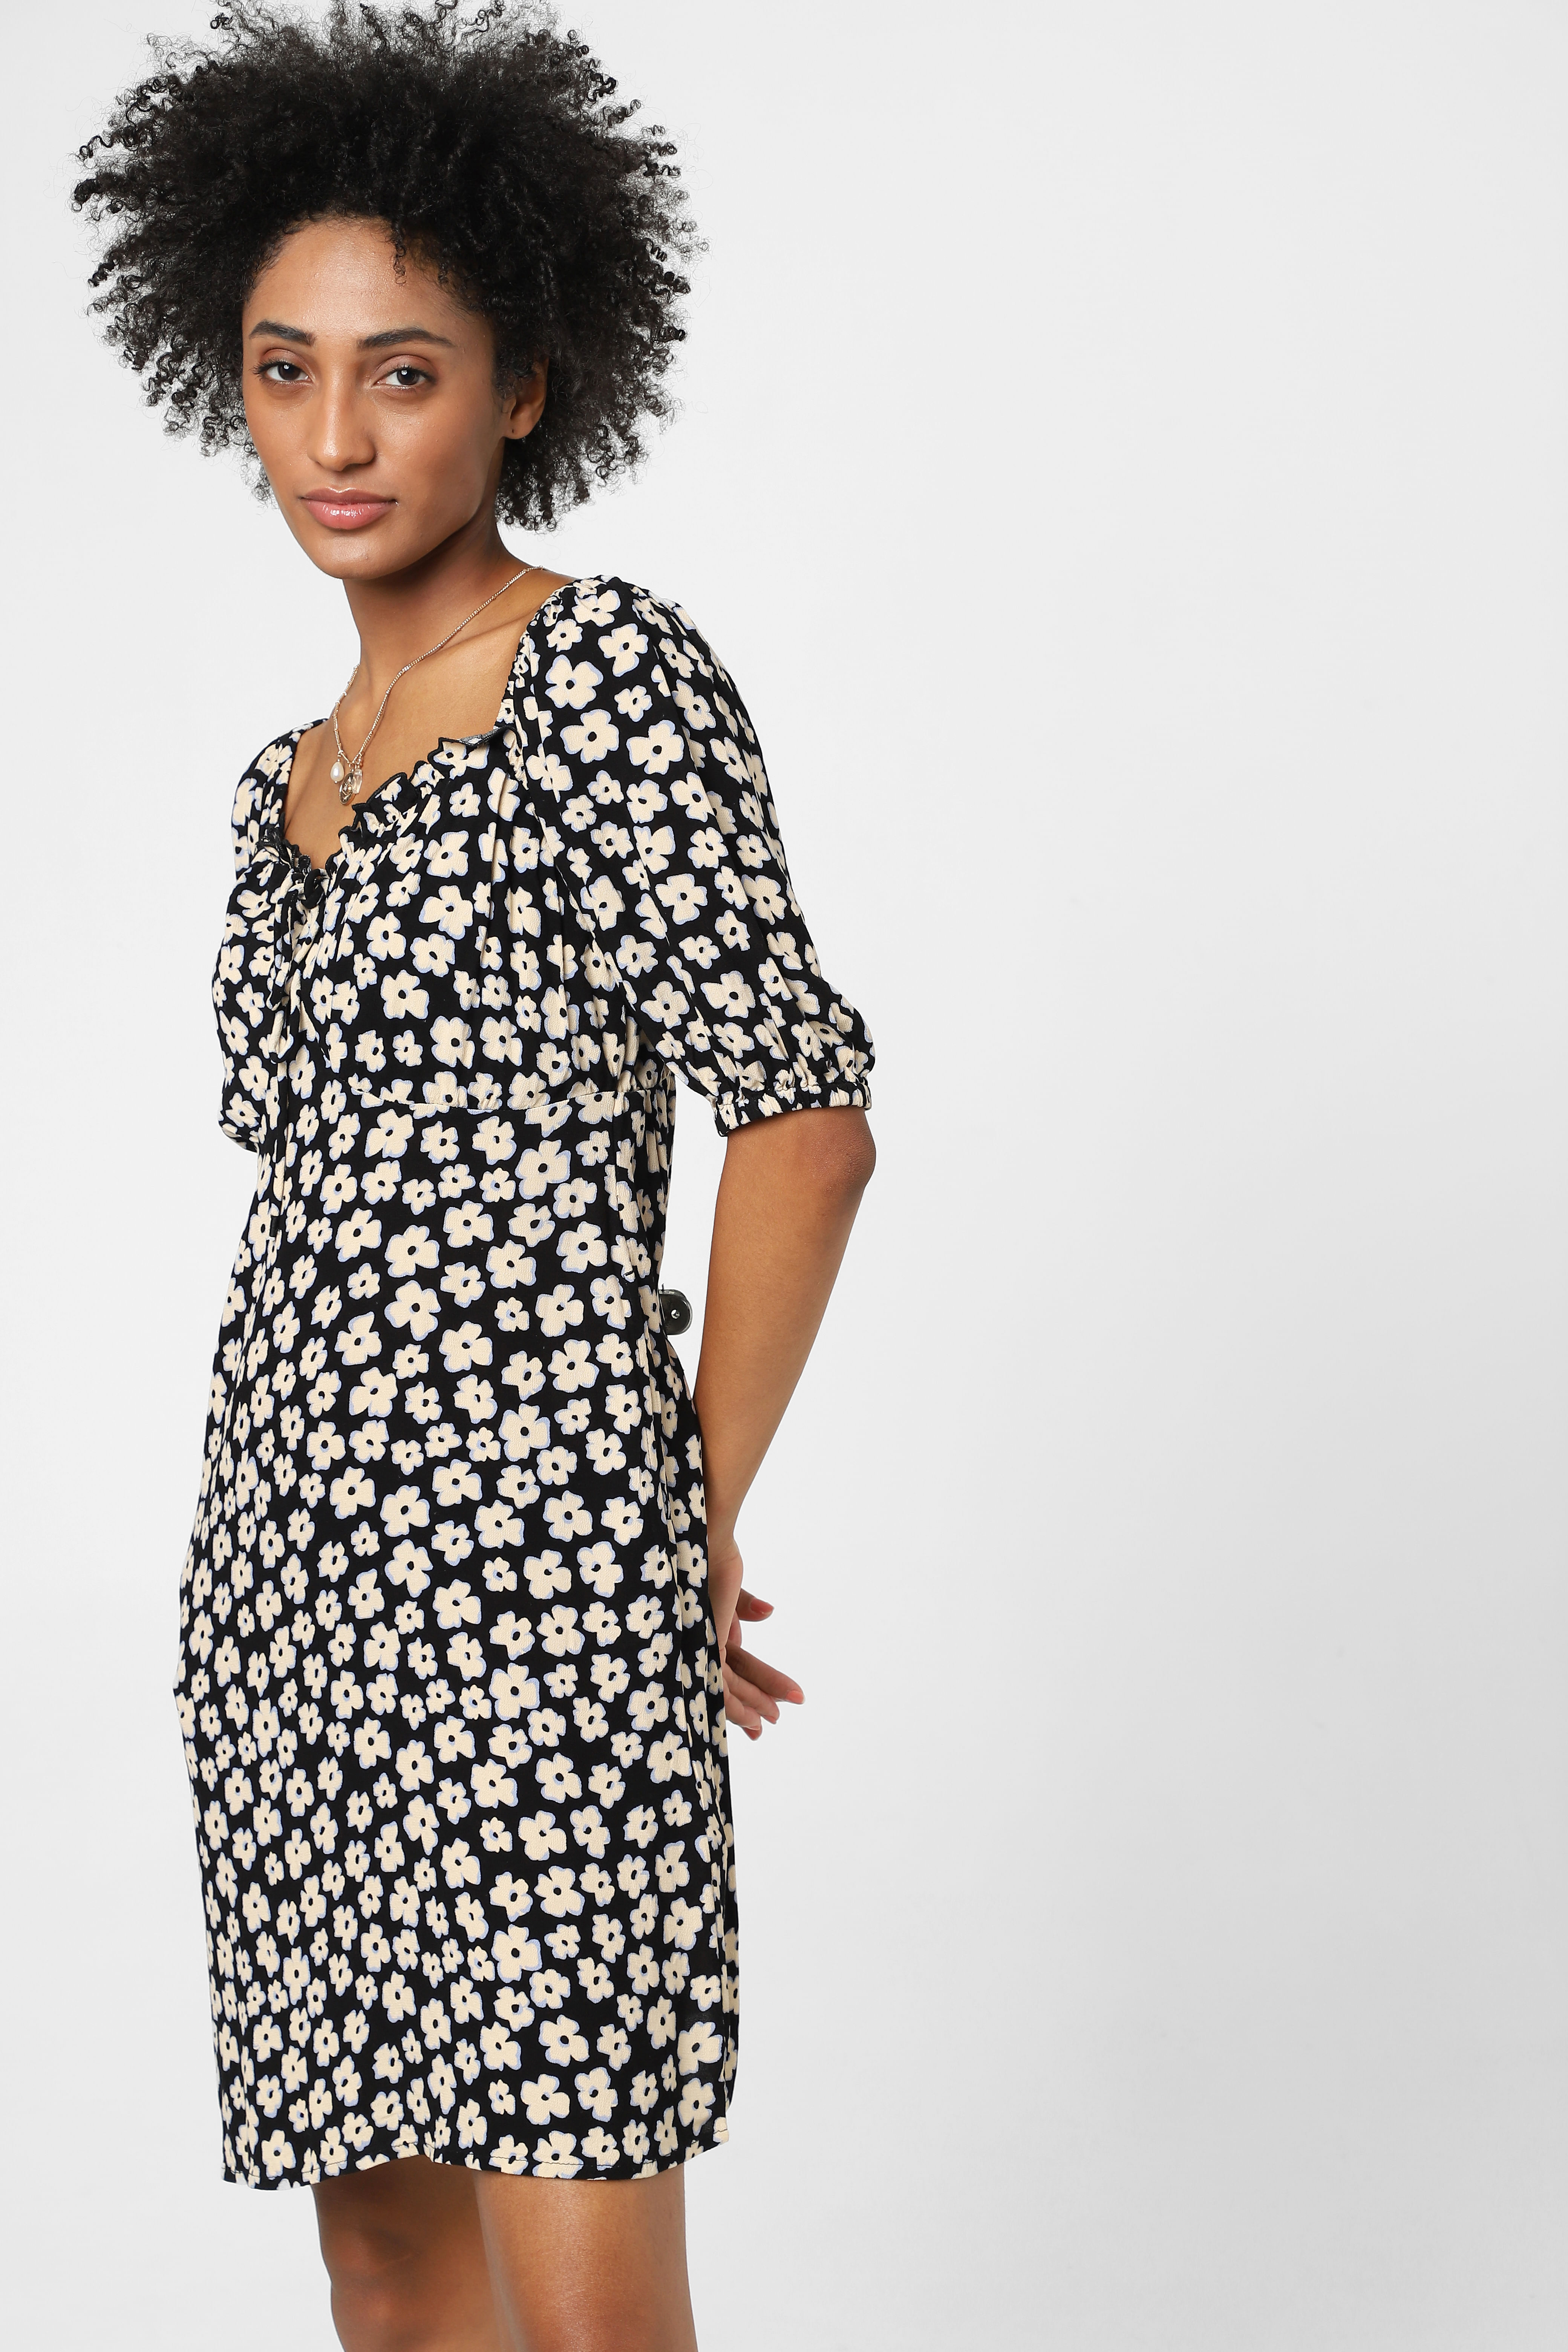 Dresses | Cute Floral Dress For Women. | Freeup